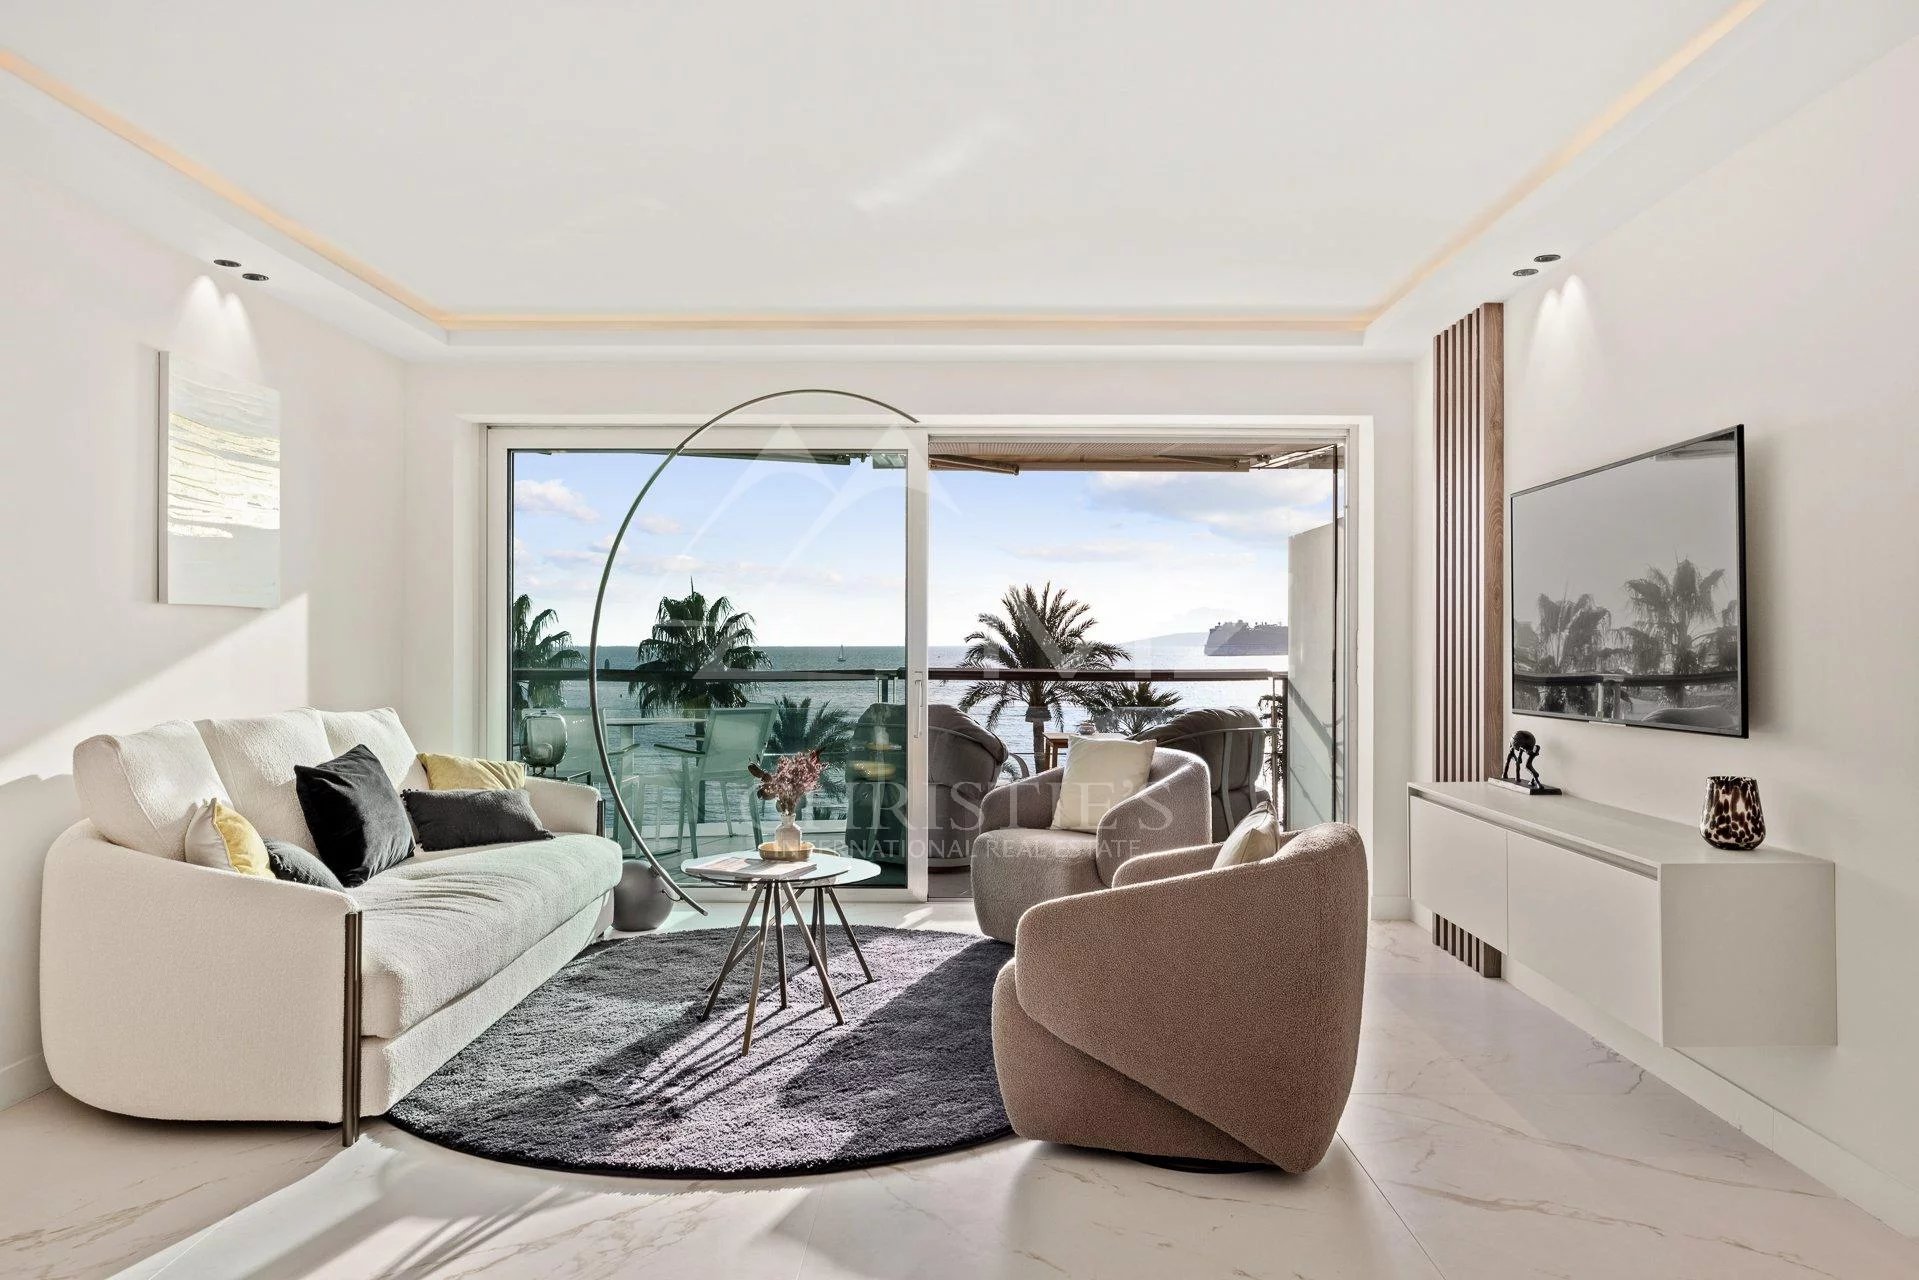 Cannes - Croisette - 3 room apartment with panoramic sea view